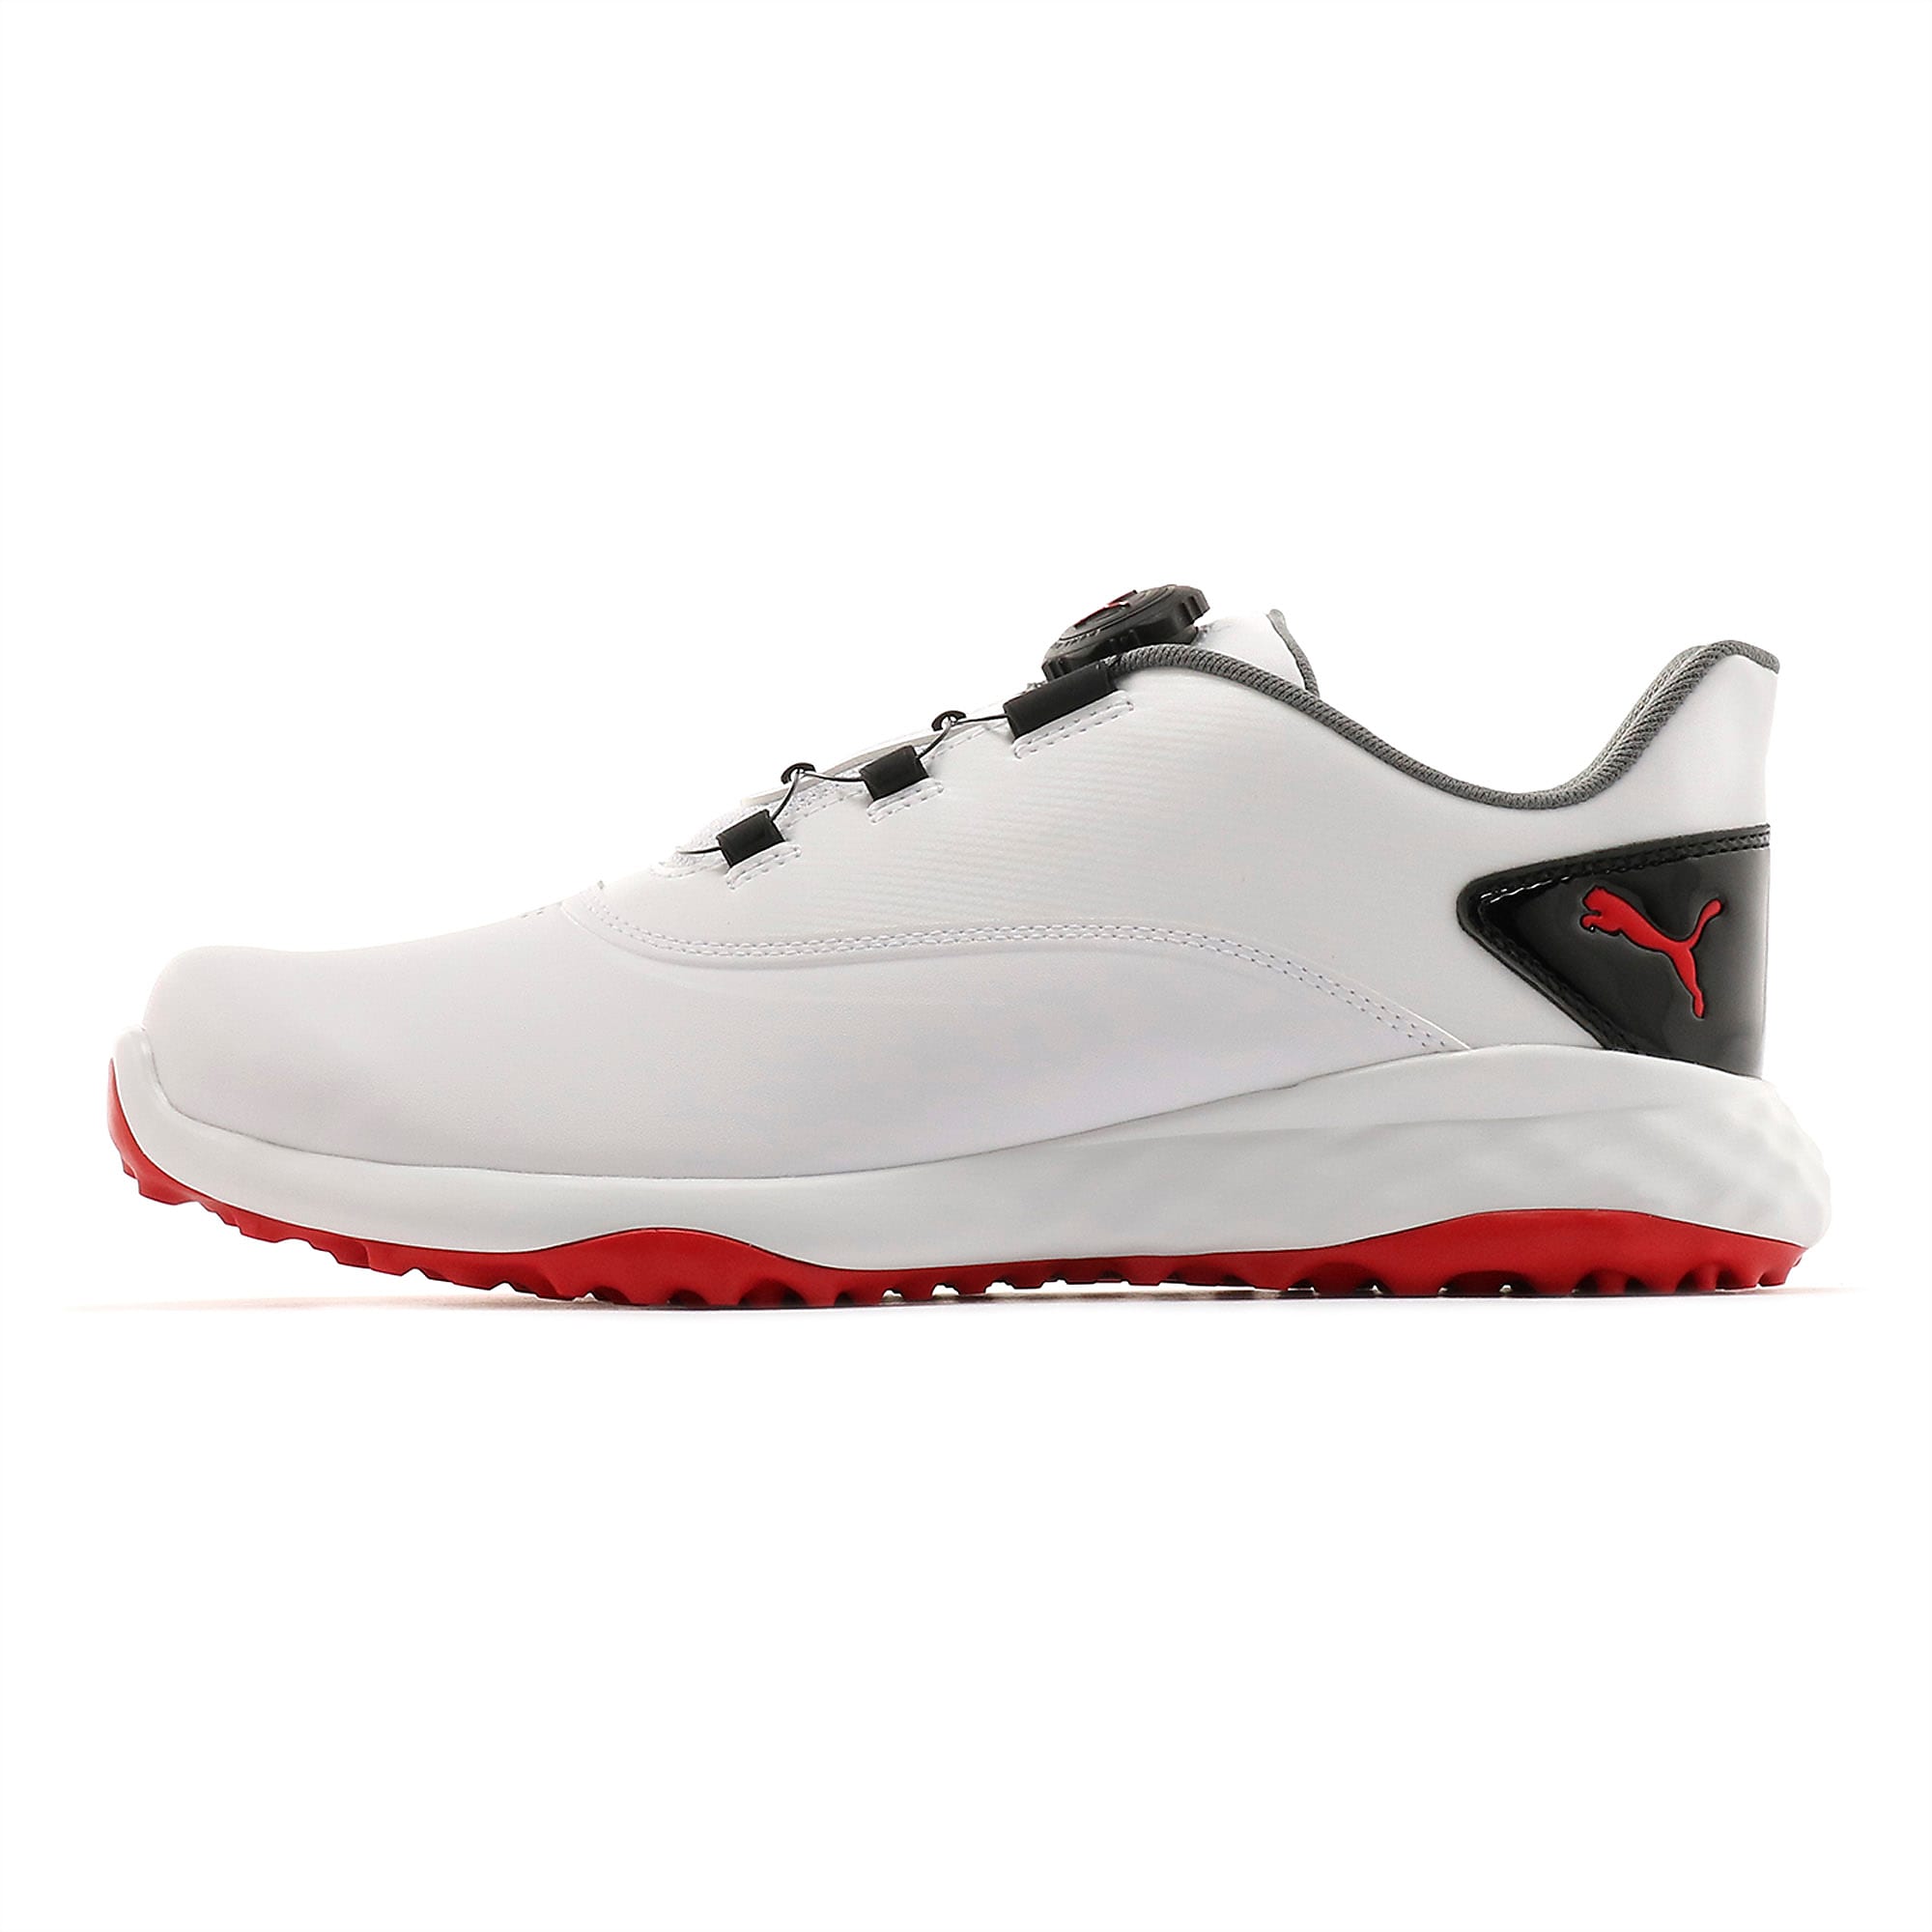 Grip Fusion DISC Golf Shoes, Puma White-High Risk Red, large-SEA